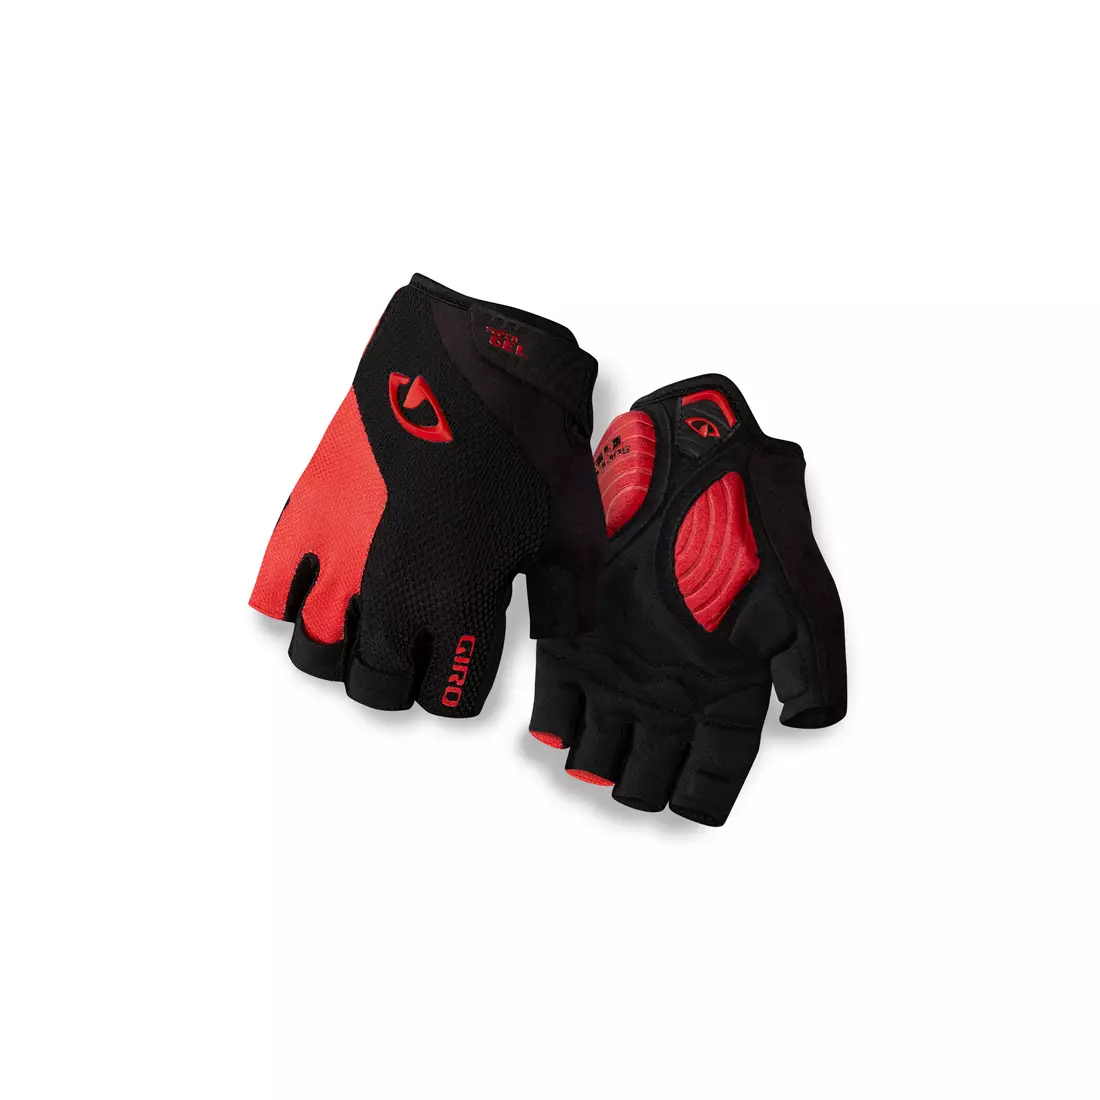 GIRO STRADE DURE cycling gloves, black-red